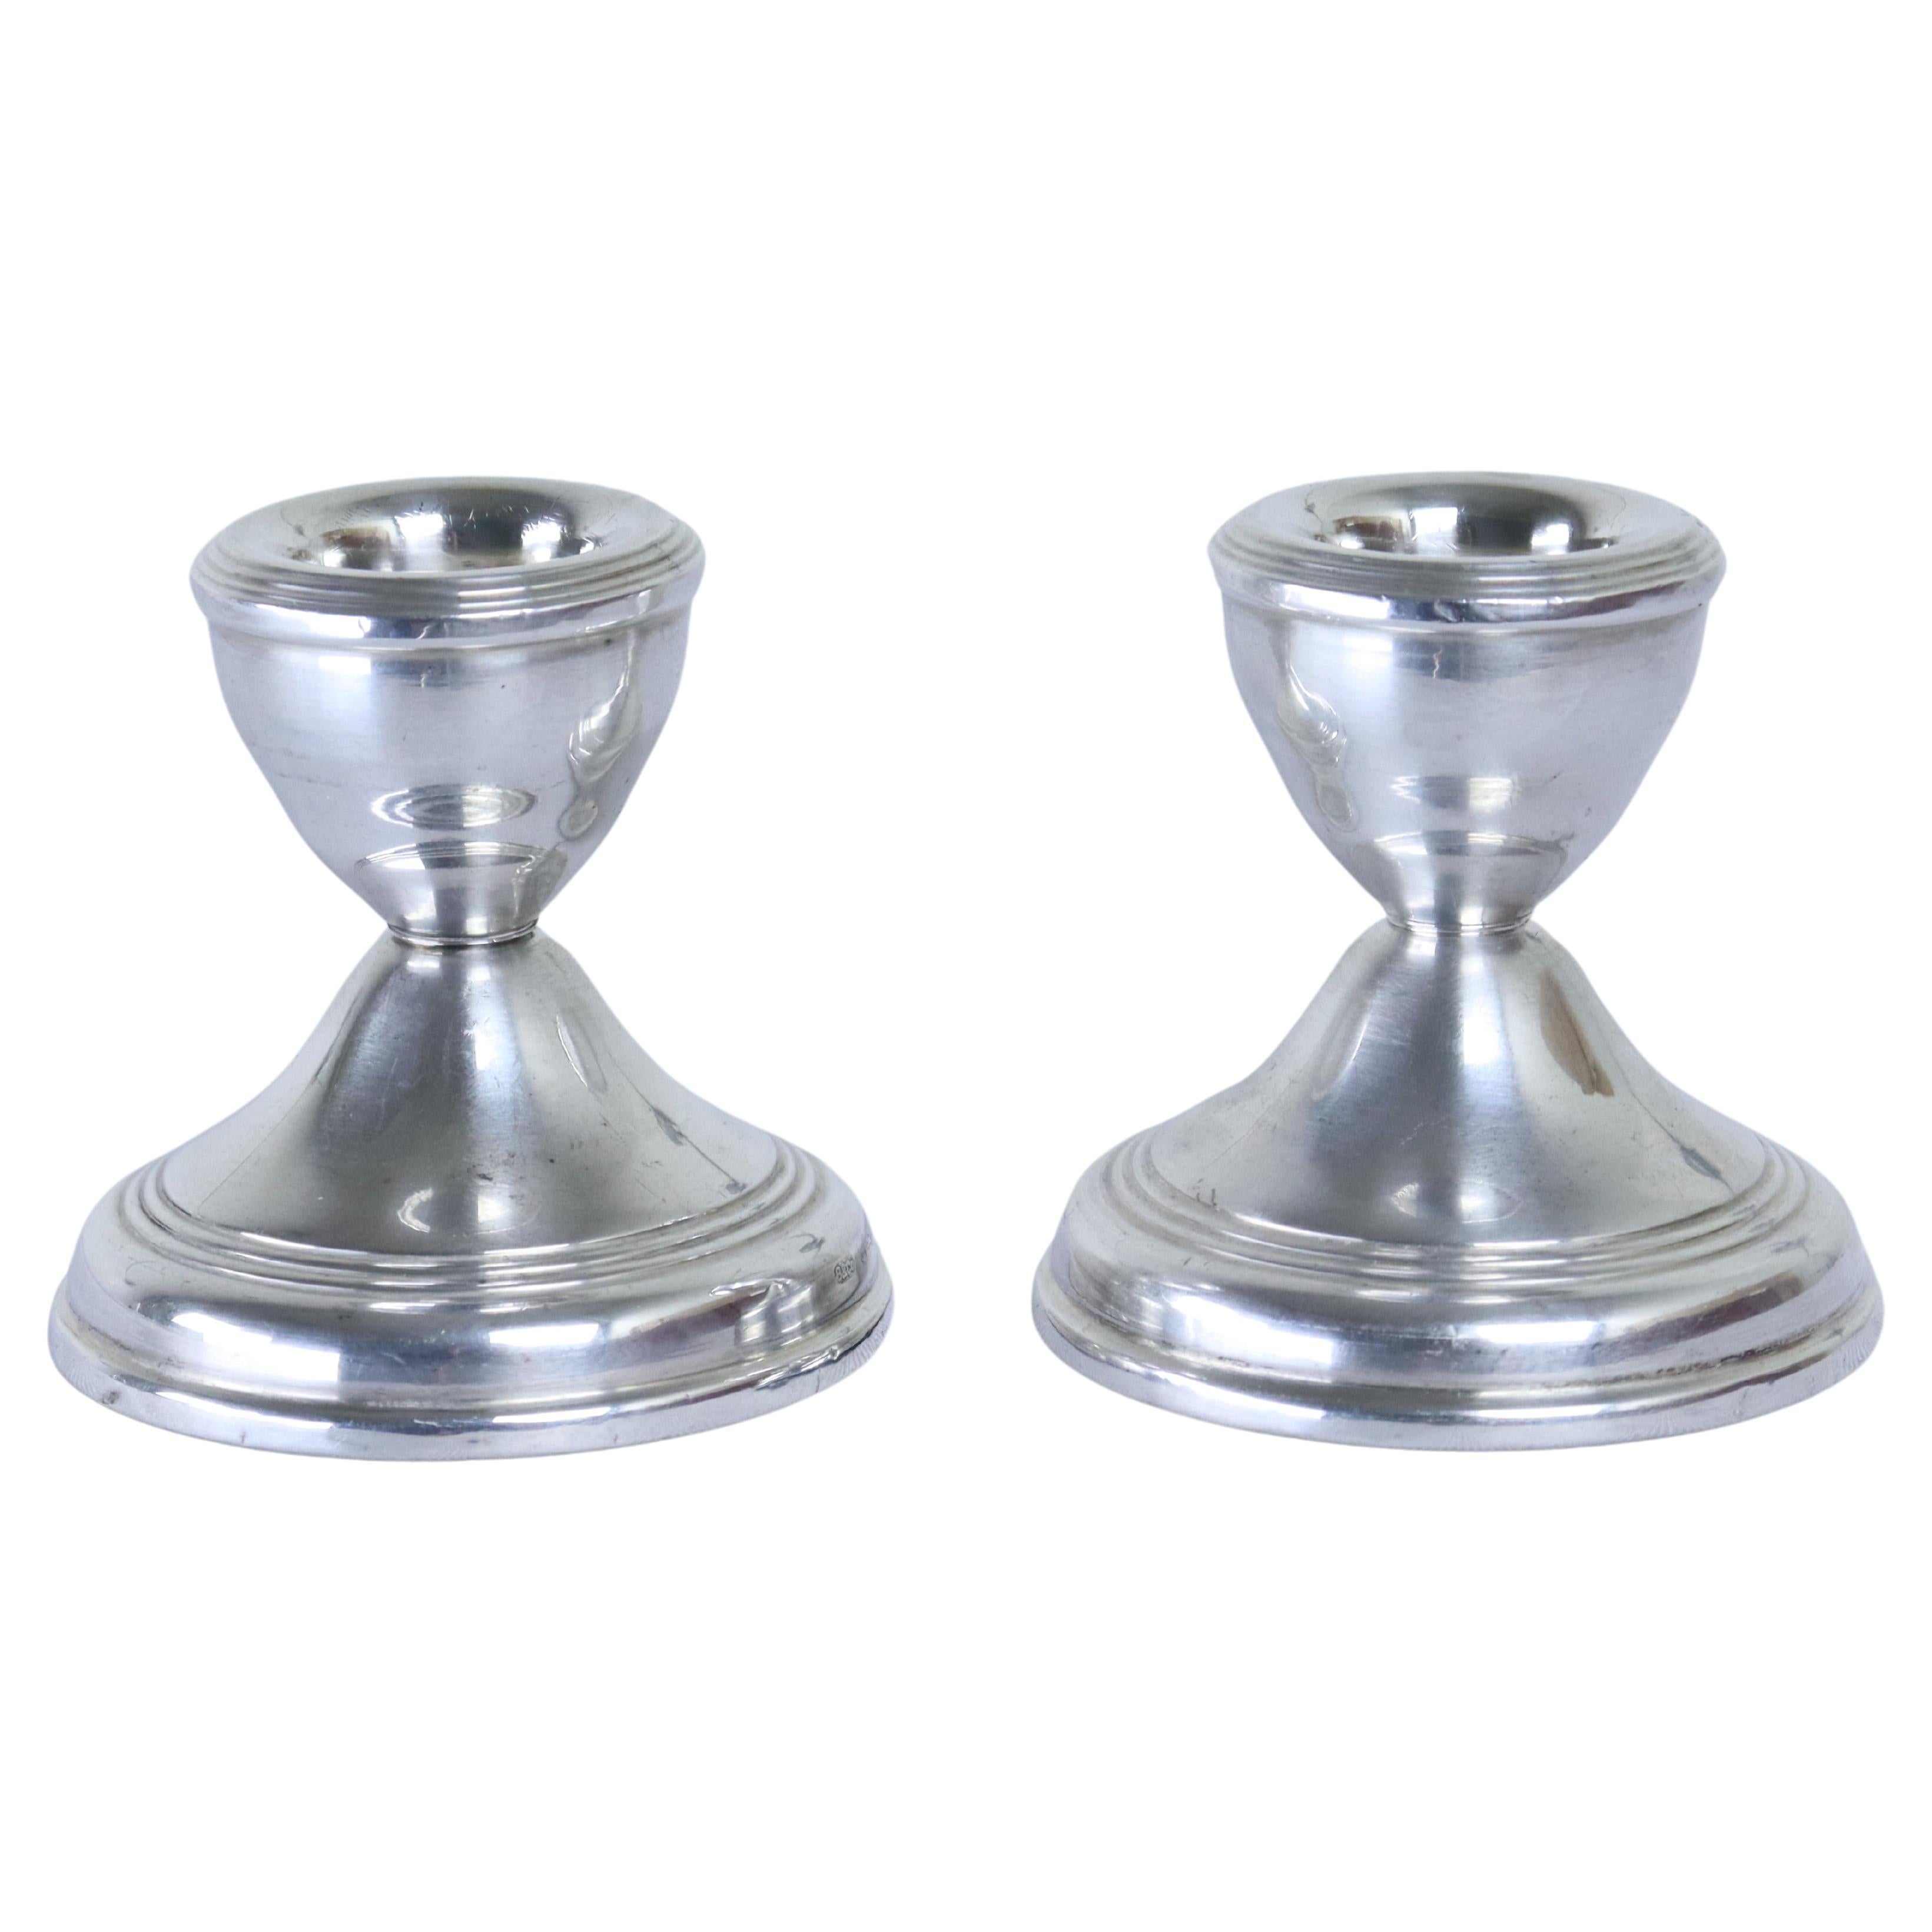 Pair of Hallmarked Sterling Silver Candlesticks by Broadway & Co., Birmingham For Sale